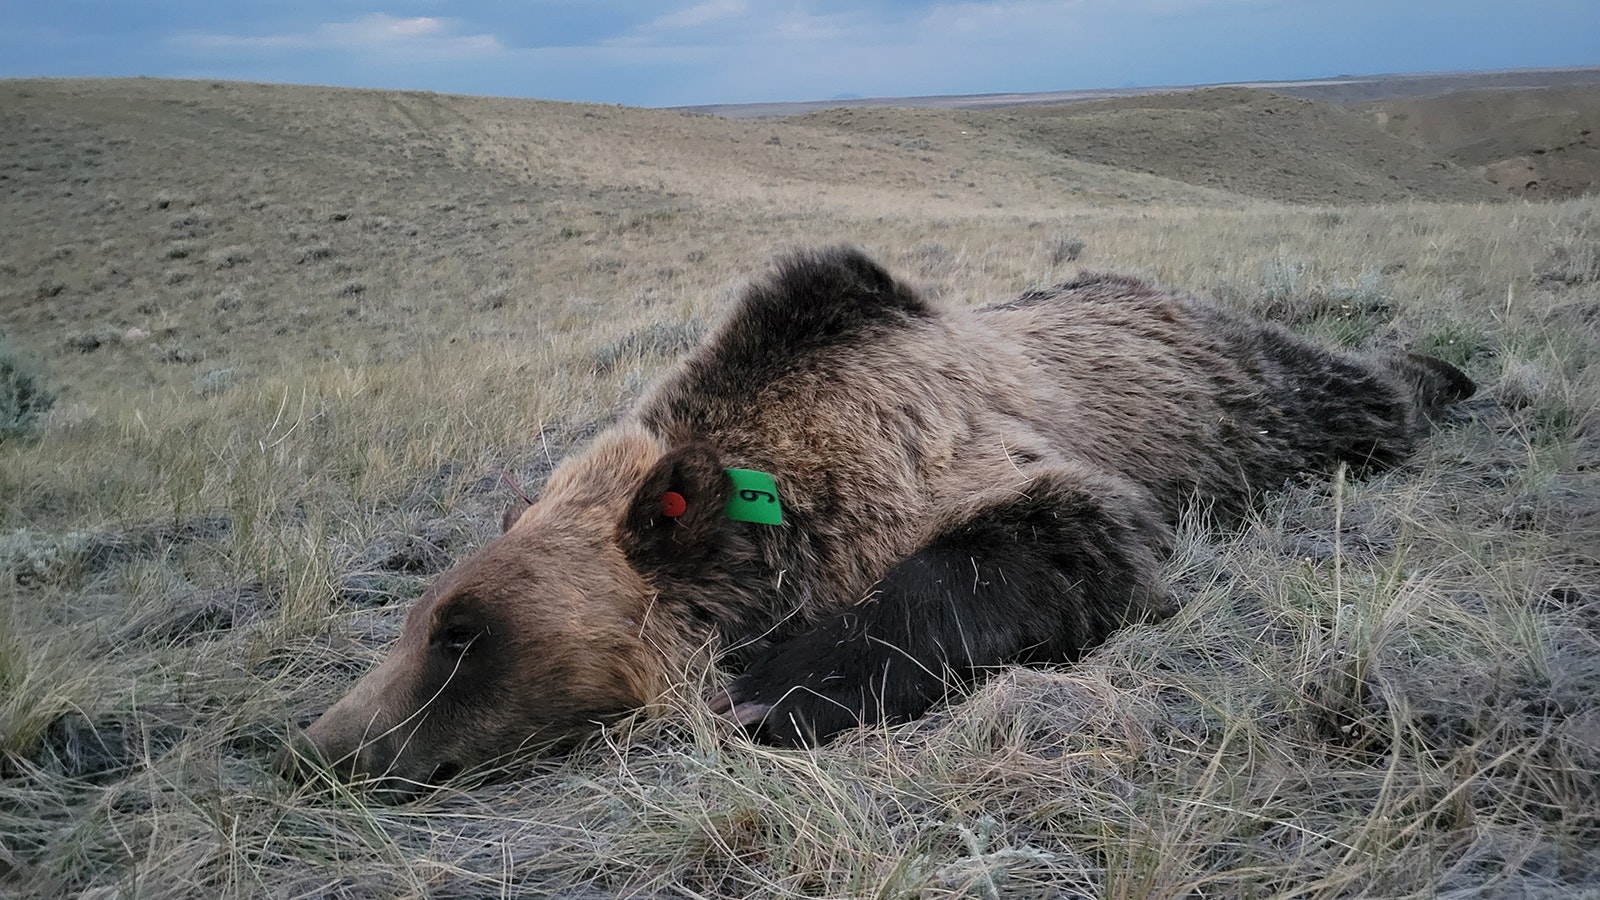 This grizzly was recently tranquilized and collared by Montana wildlife agents for guard dog research project testing to see if livestock guard dogs are effective at keeping bears away from farms with grain spills.